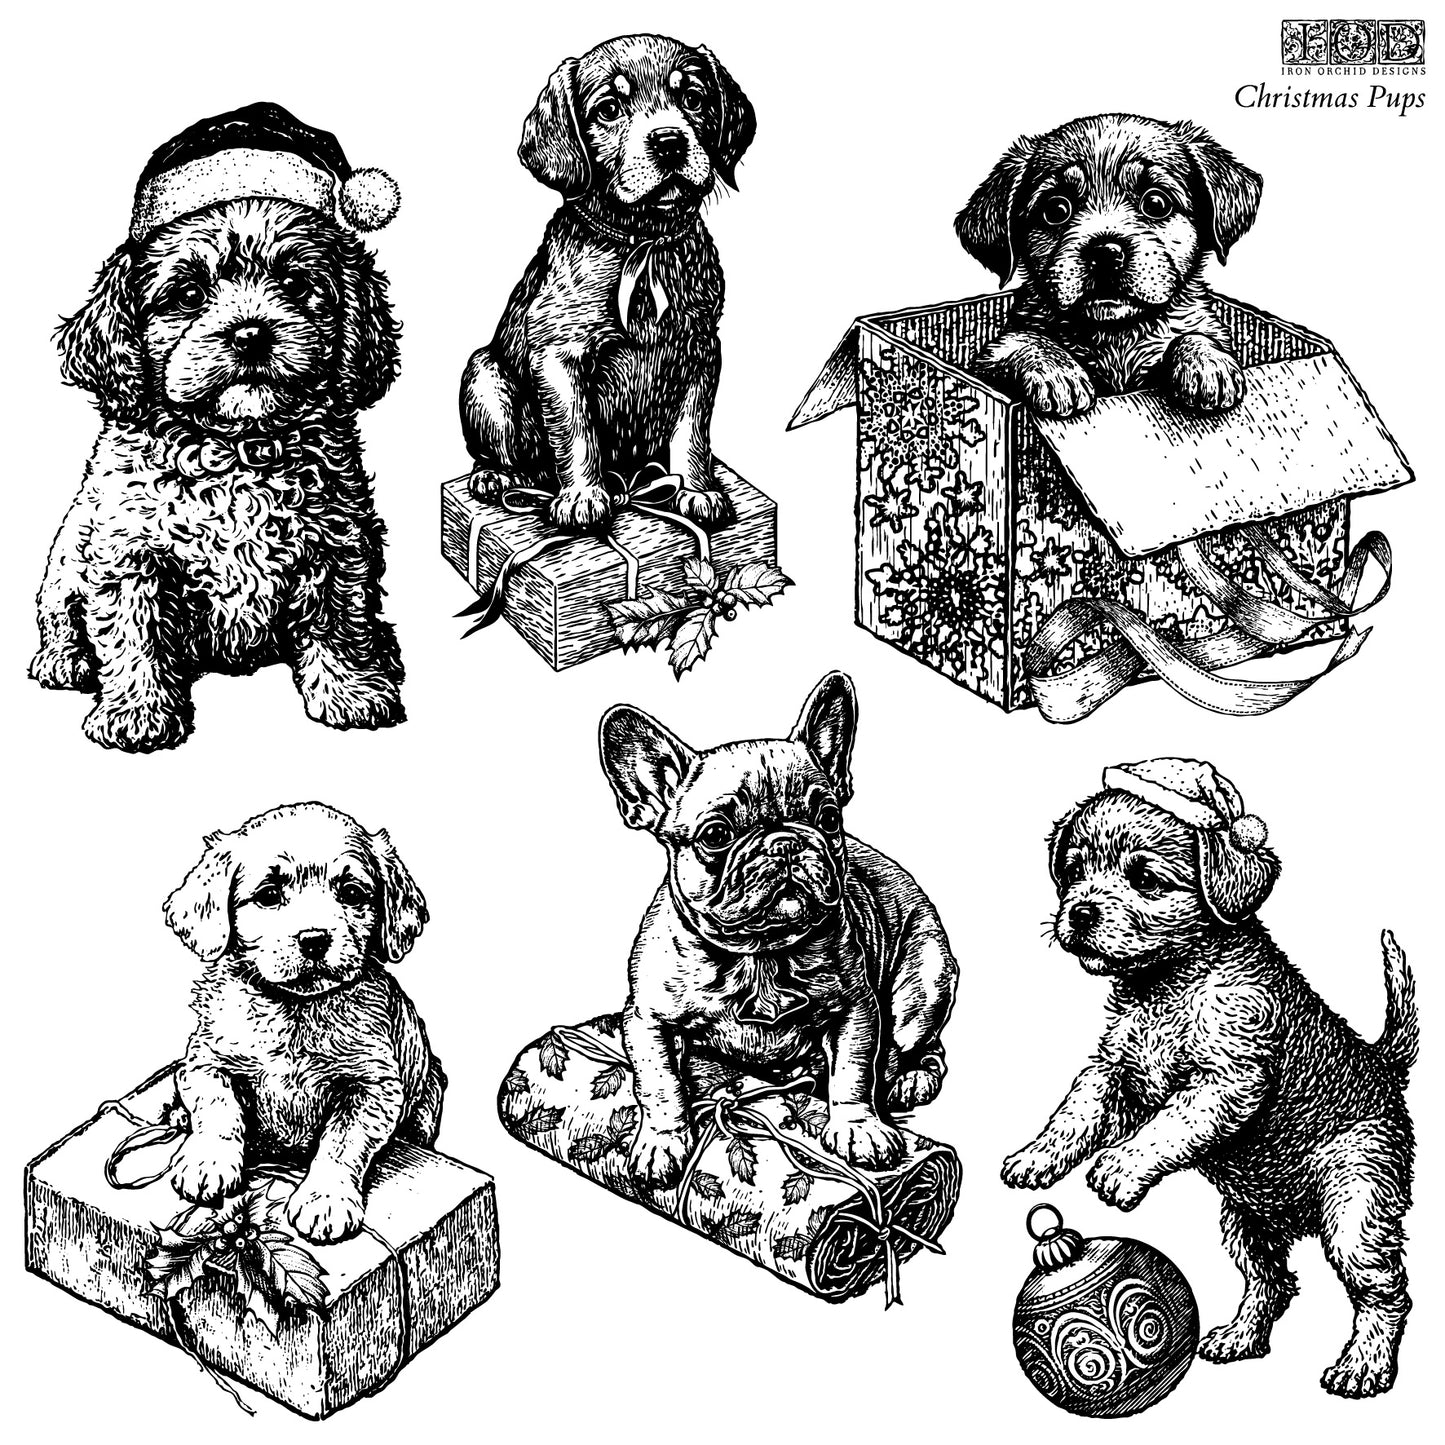 Christmas Pups Stamp *LIMITED EDITION*